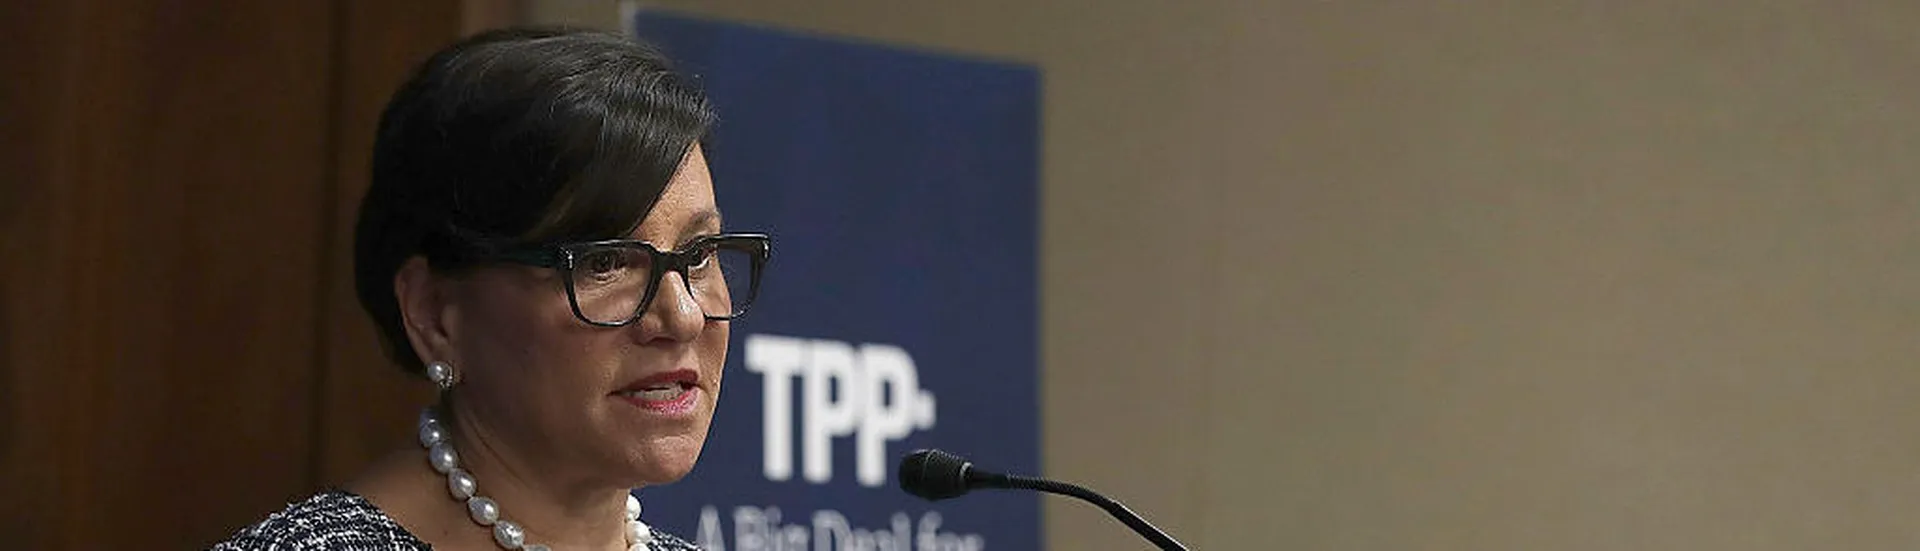 WASHINGTON, DC &#8211; SEPTEMBER 26:  U.S. Secretary of Commerce Penny Pritzker speaks during a discussion on TPP September 26, 2016 on Capitol Hill in Washington, DC. The Progressive Policy Institute (PPI) hosted a discussion on &#8220;The Trans-Pacific Partnership: A Big Deal for America&#8217;s Small Exporters.&#8221;  (Photo by Alex Wong/Getty ...